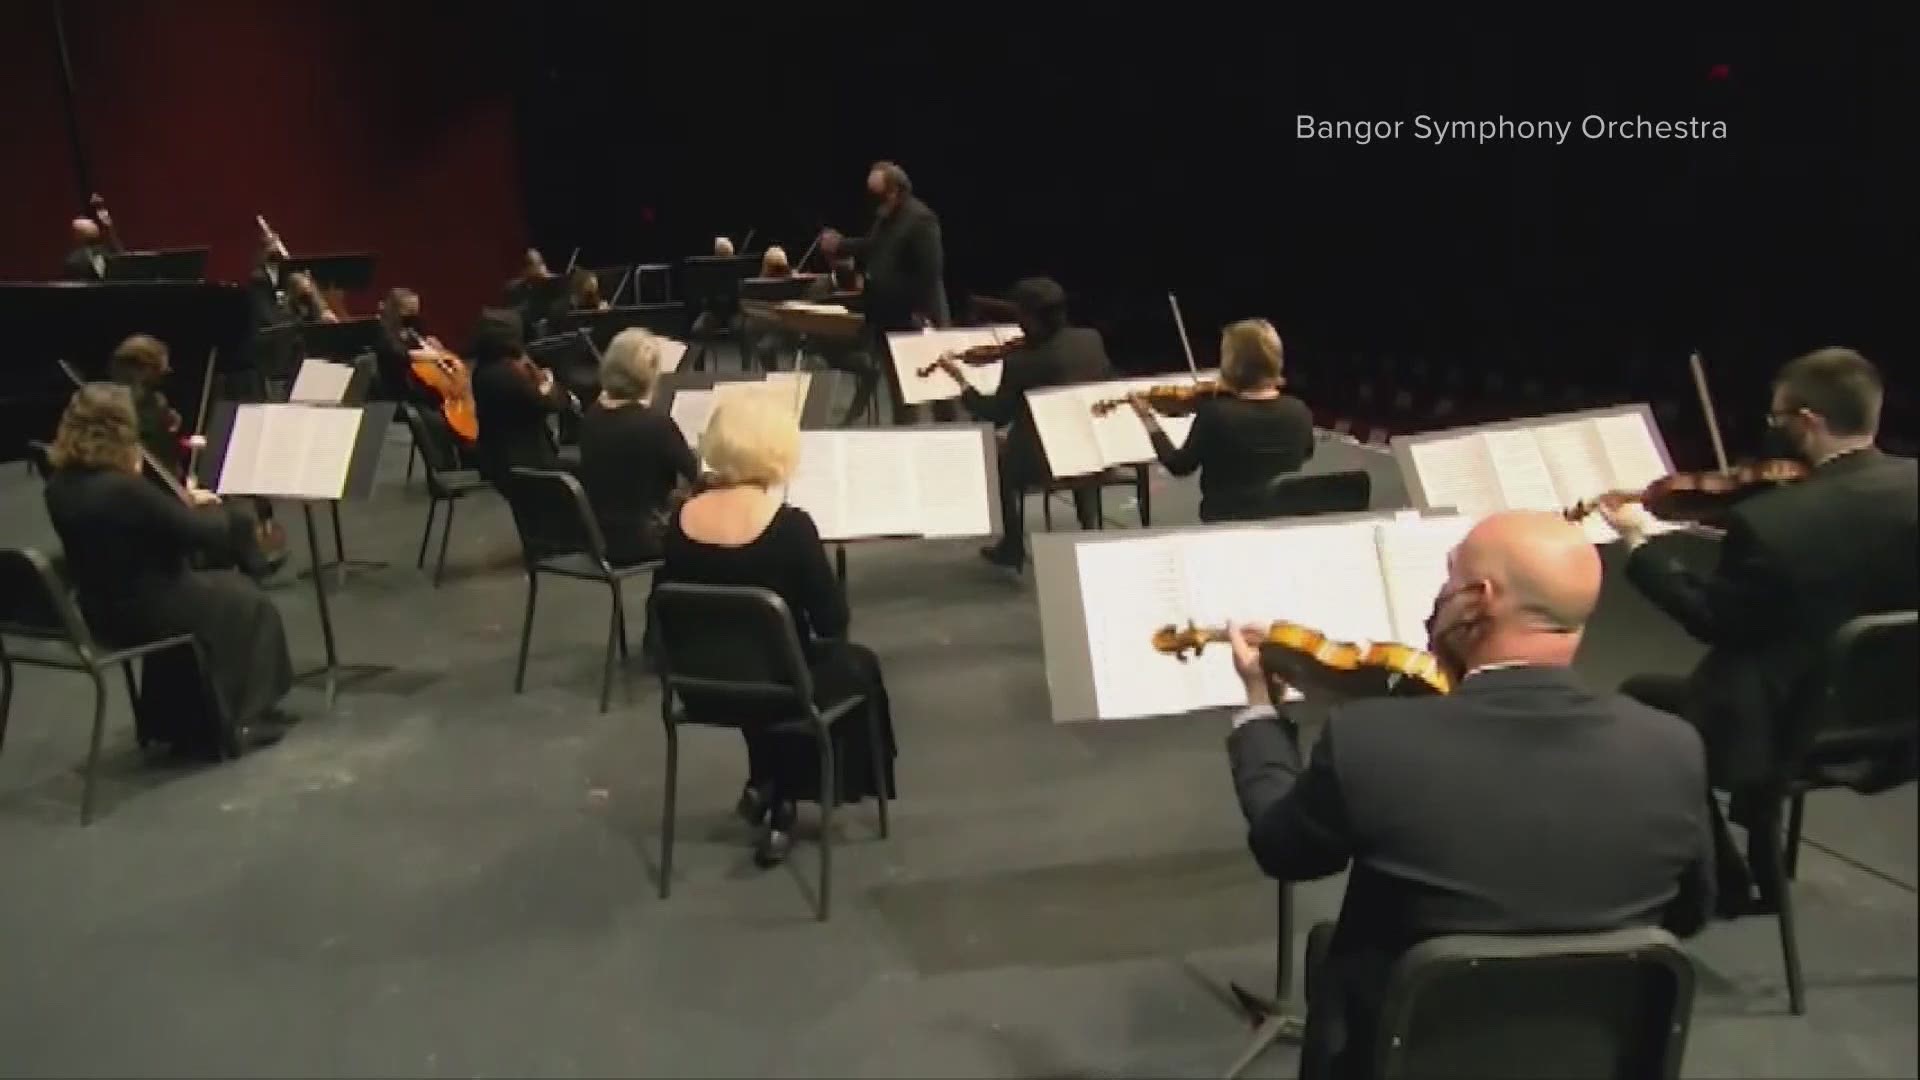 The Bangor Symphony Orchestra is conducting its 125th anniversary season virtually during the pandemic by recording concerts for audiences to stream online.